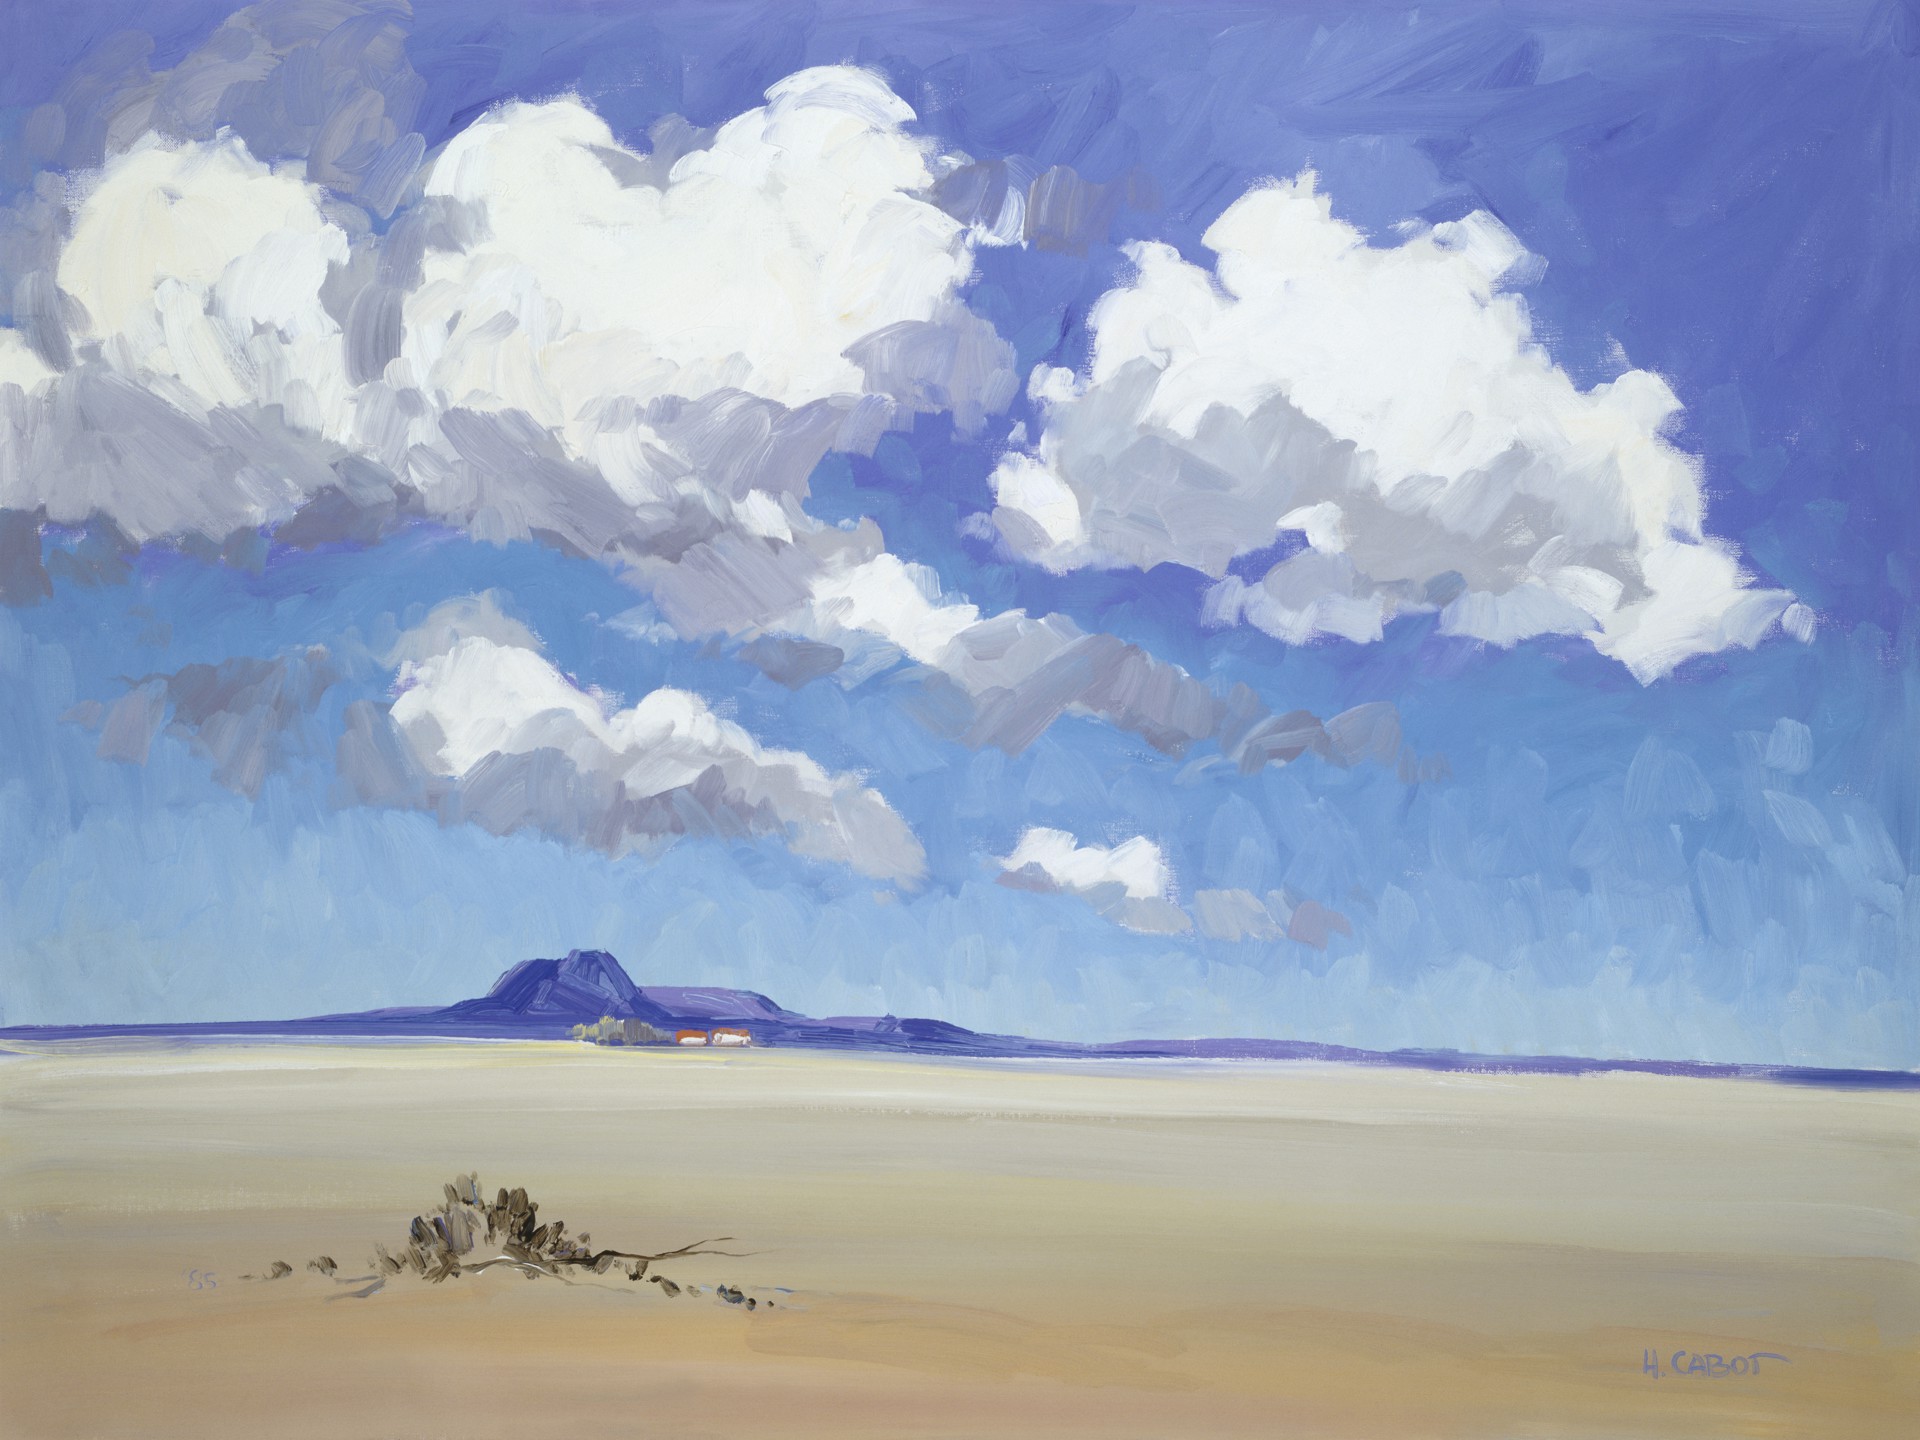 Line Camp Arizona ~ Inquire to Order by Giclees Hugh Cabot